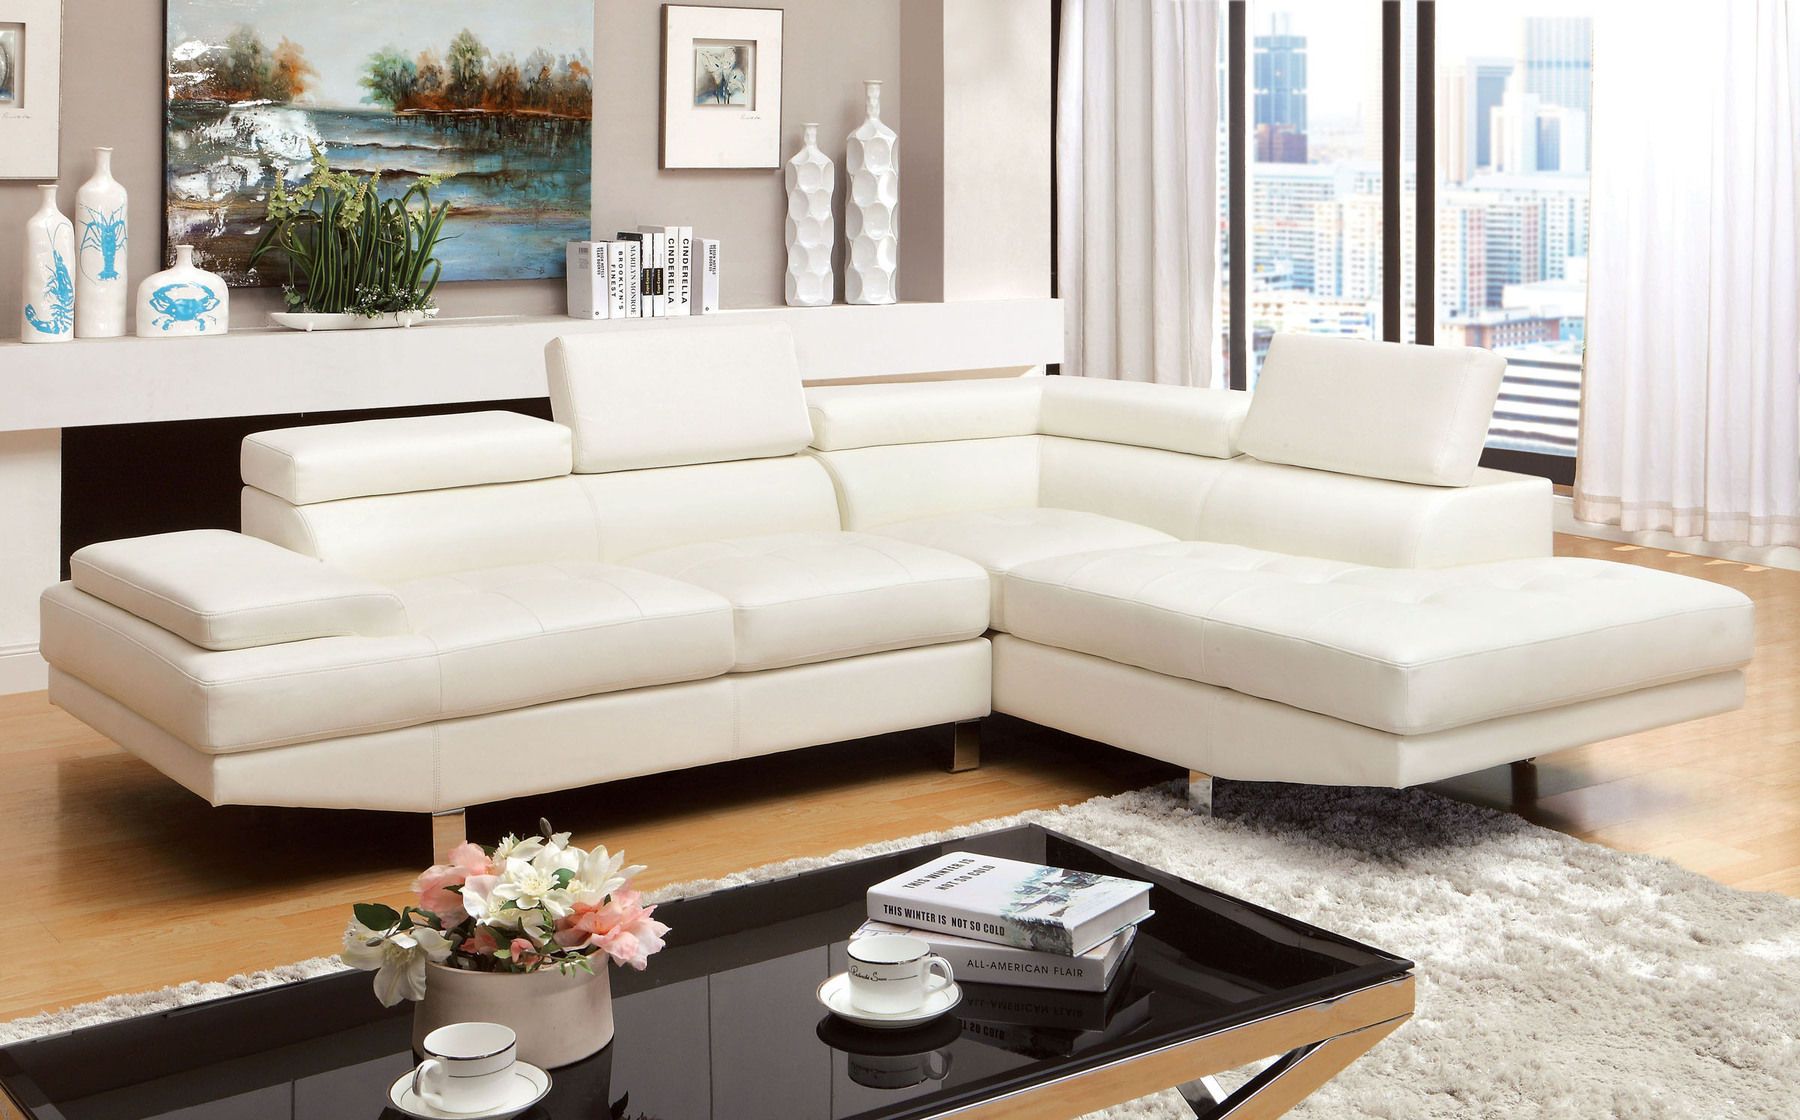 Esofastore Modern Contemporary White Bonded Leather Match Sofa Chaise Living Room Chrome Legs 2pc Sectional Sofa